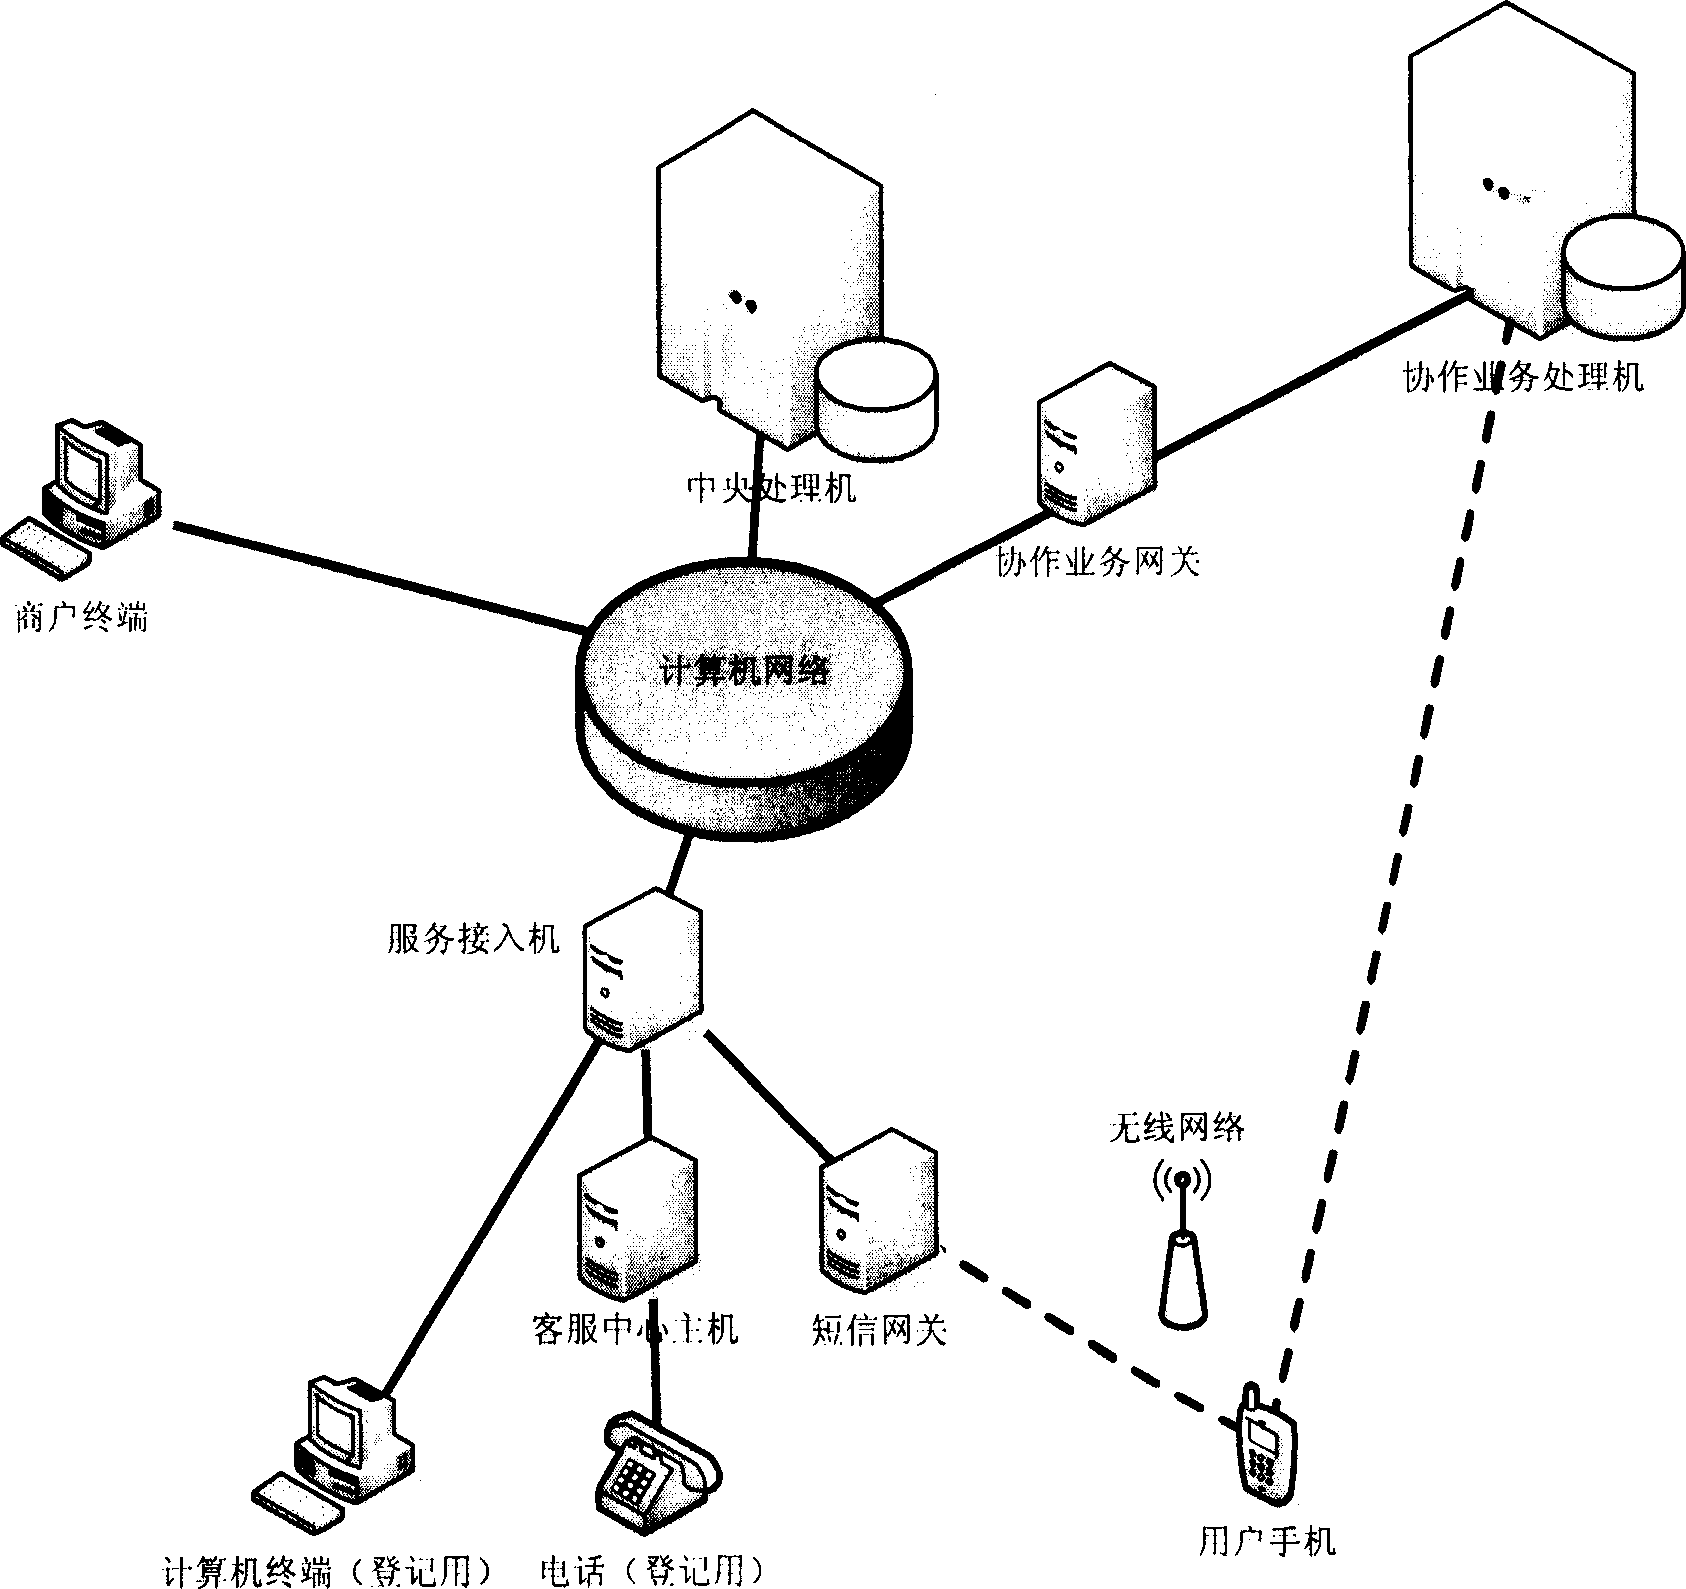 Information collection, transmission, processing system and method based on mobile phone short message